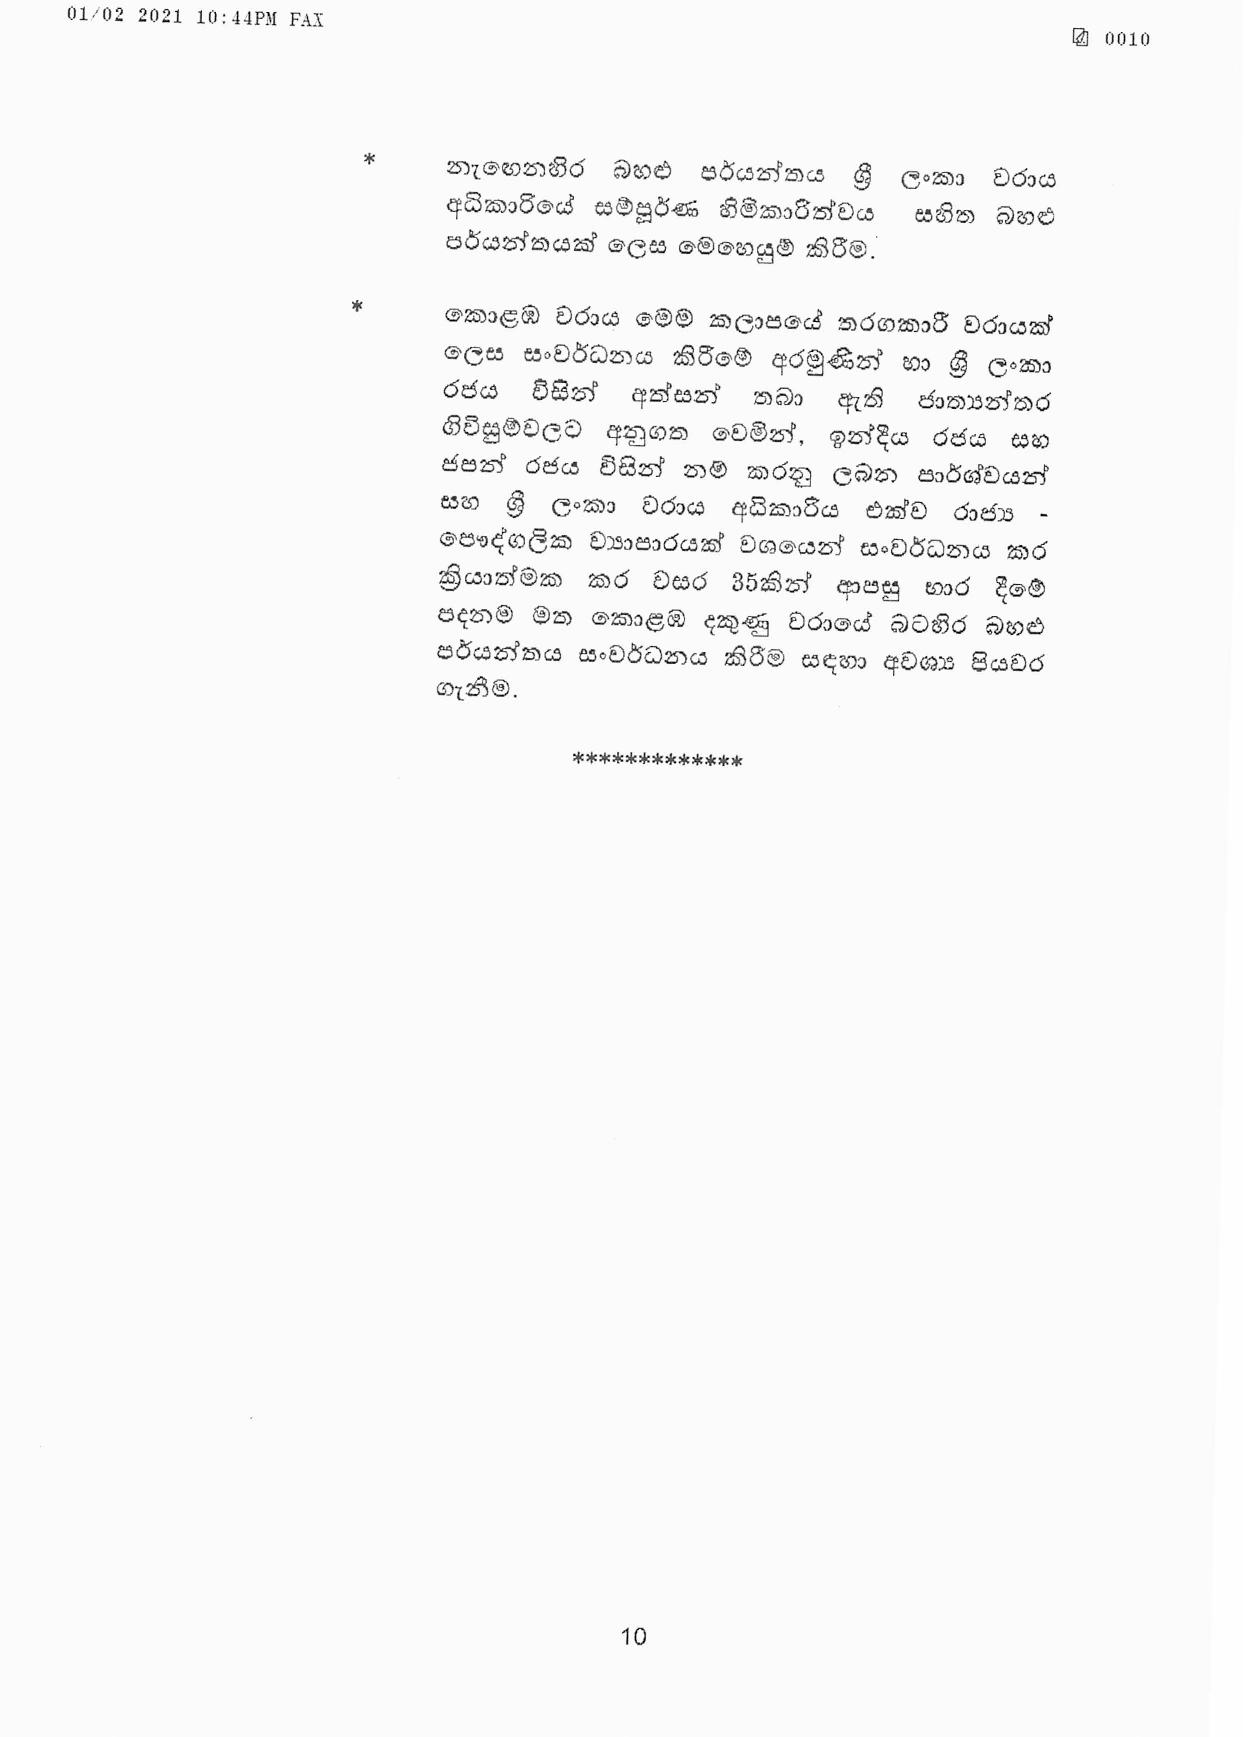 Cabinet Decision on 01.02.2021 page 010